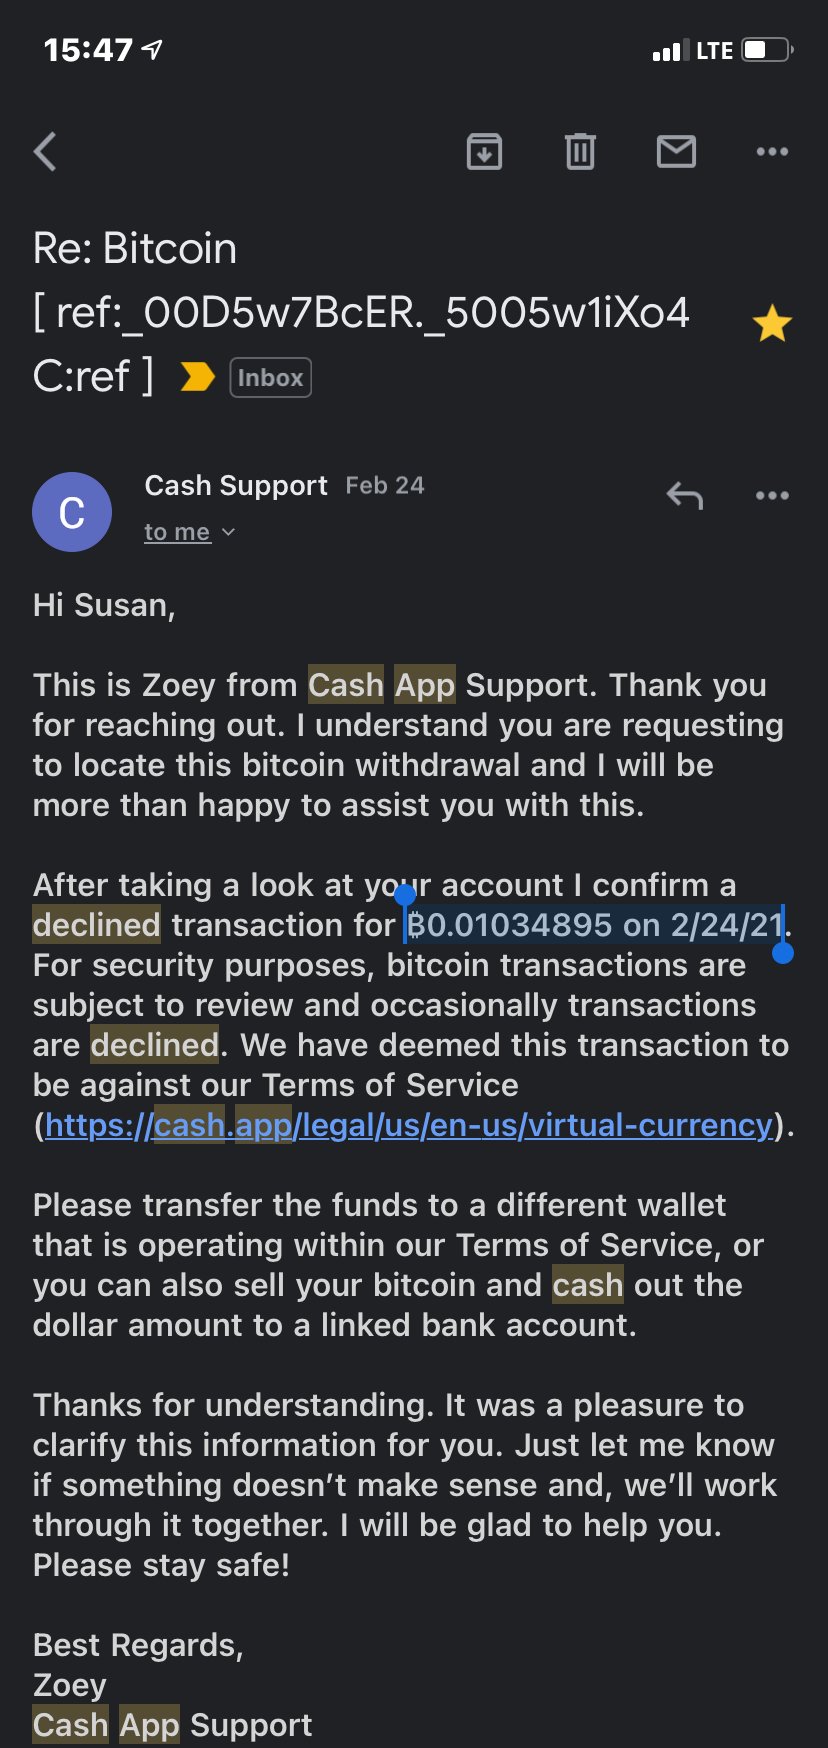 Cash App complaint Did not put my Bitcoin back after they declined the transfer